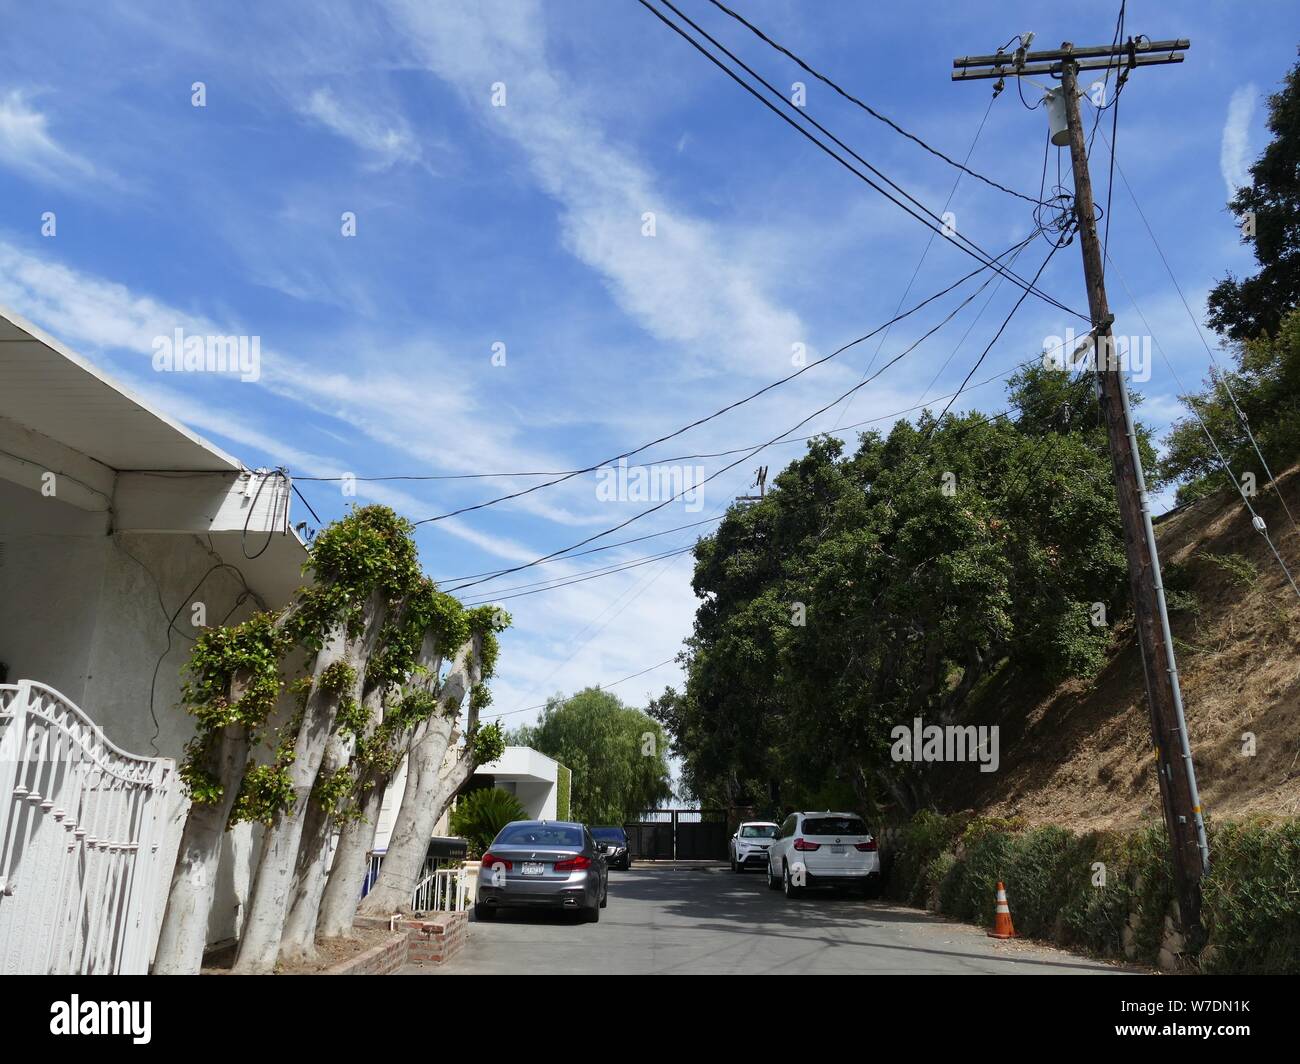 Los Angeles, USA. 03rd Aug, 2019. View into the Cielo Drive. The gate at the end of the cul-de-sac leads to the former property of the house where the actress Sharon Tate was murdered. A barbaric series of murders scared the world 50 years ago. Sect leader Charles Manson incited his followers to blood orgies. In 1969 also the highly pregnant actress Sharon Tate was killed. (to dpa '50 Years after the Manson Bloodbath: On the Trails of Sharon Tate') Credit: Barbara Munker/dpa/Alamy Live News Stock Photo